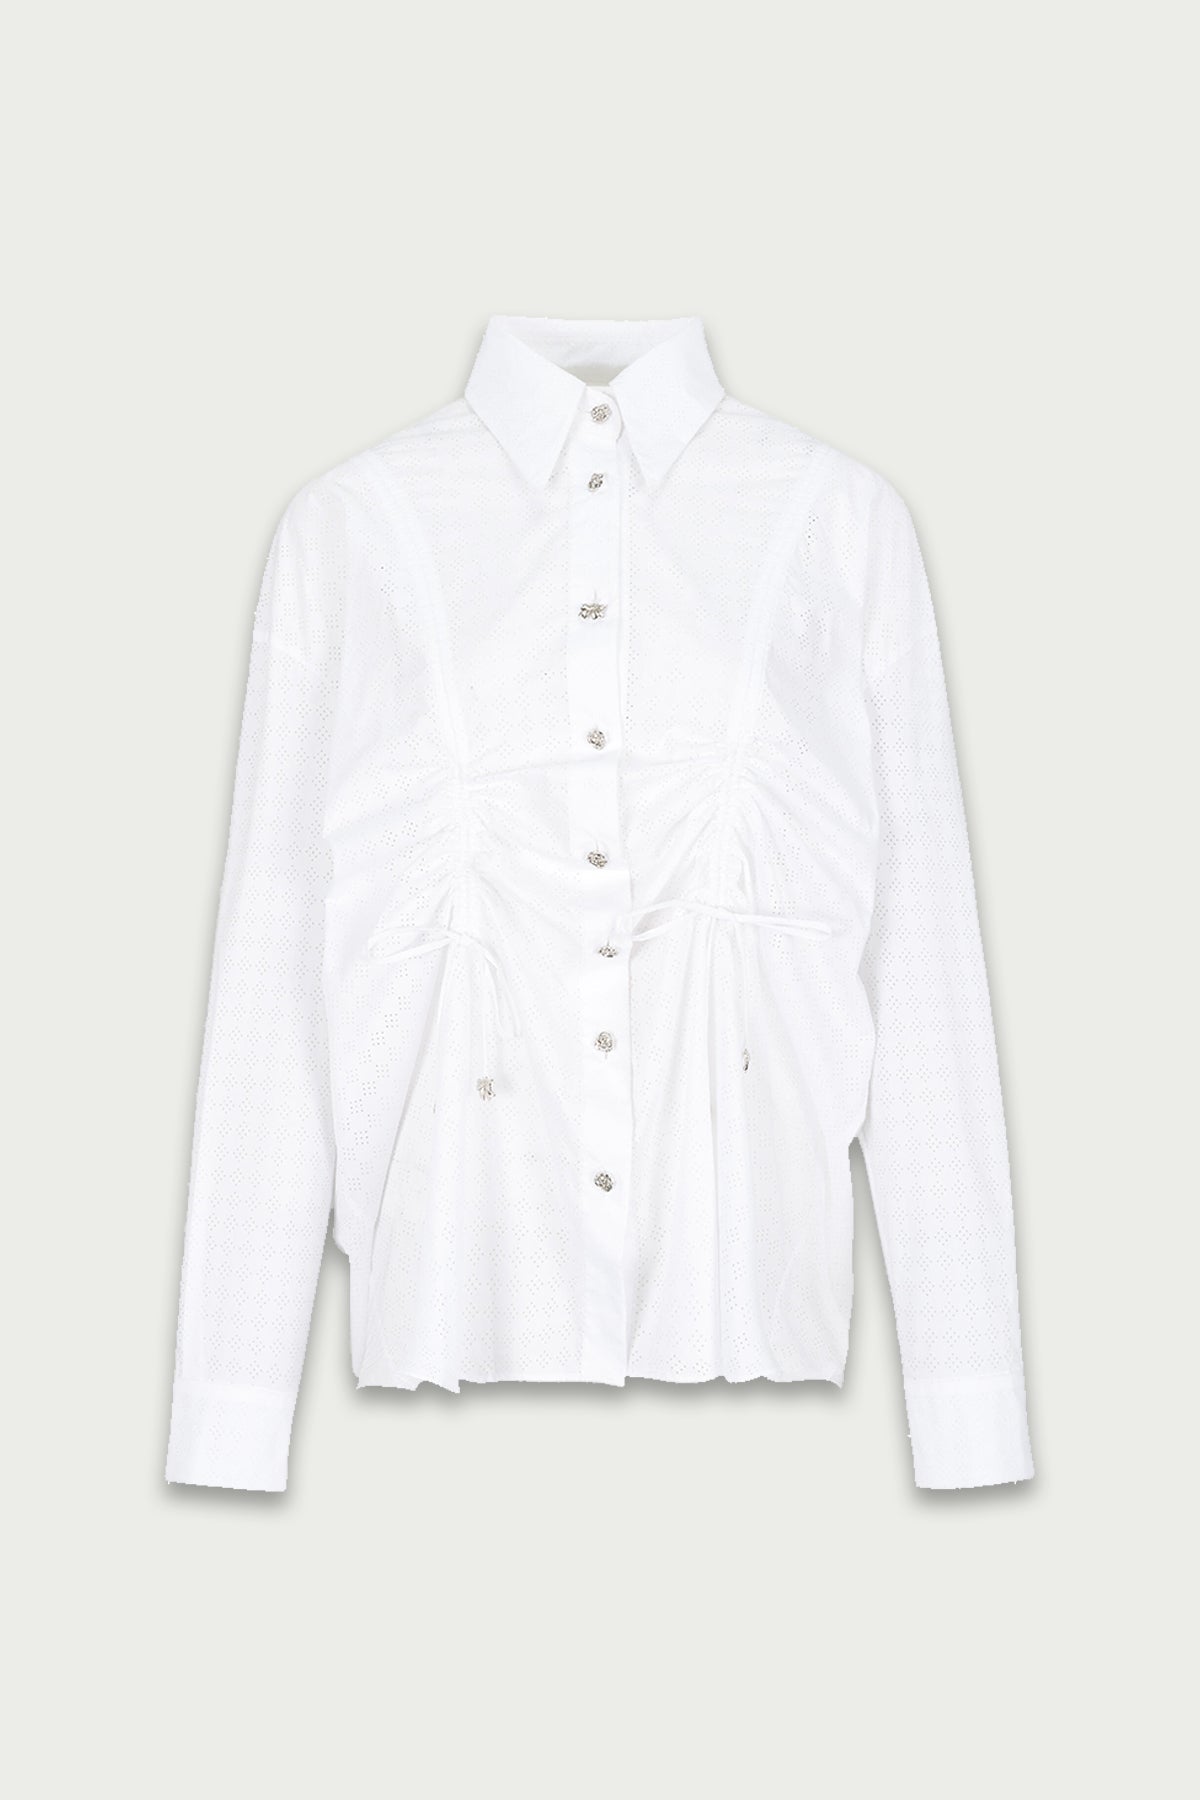 Mukzin | Cut out Front and Back White Shirt